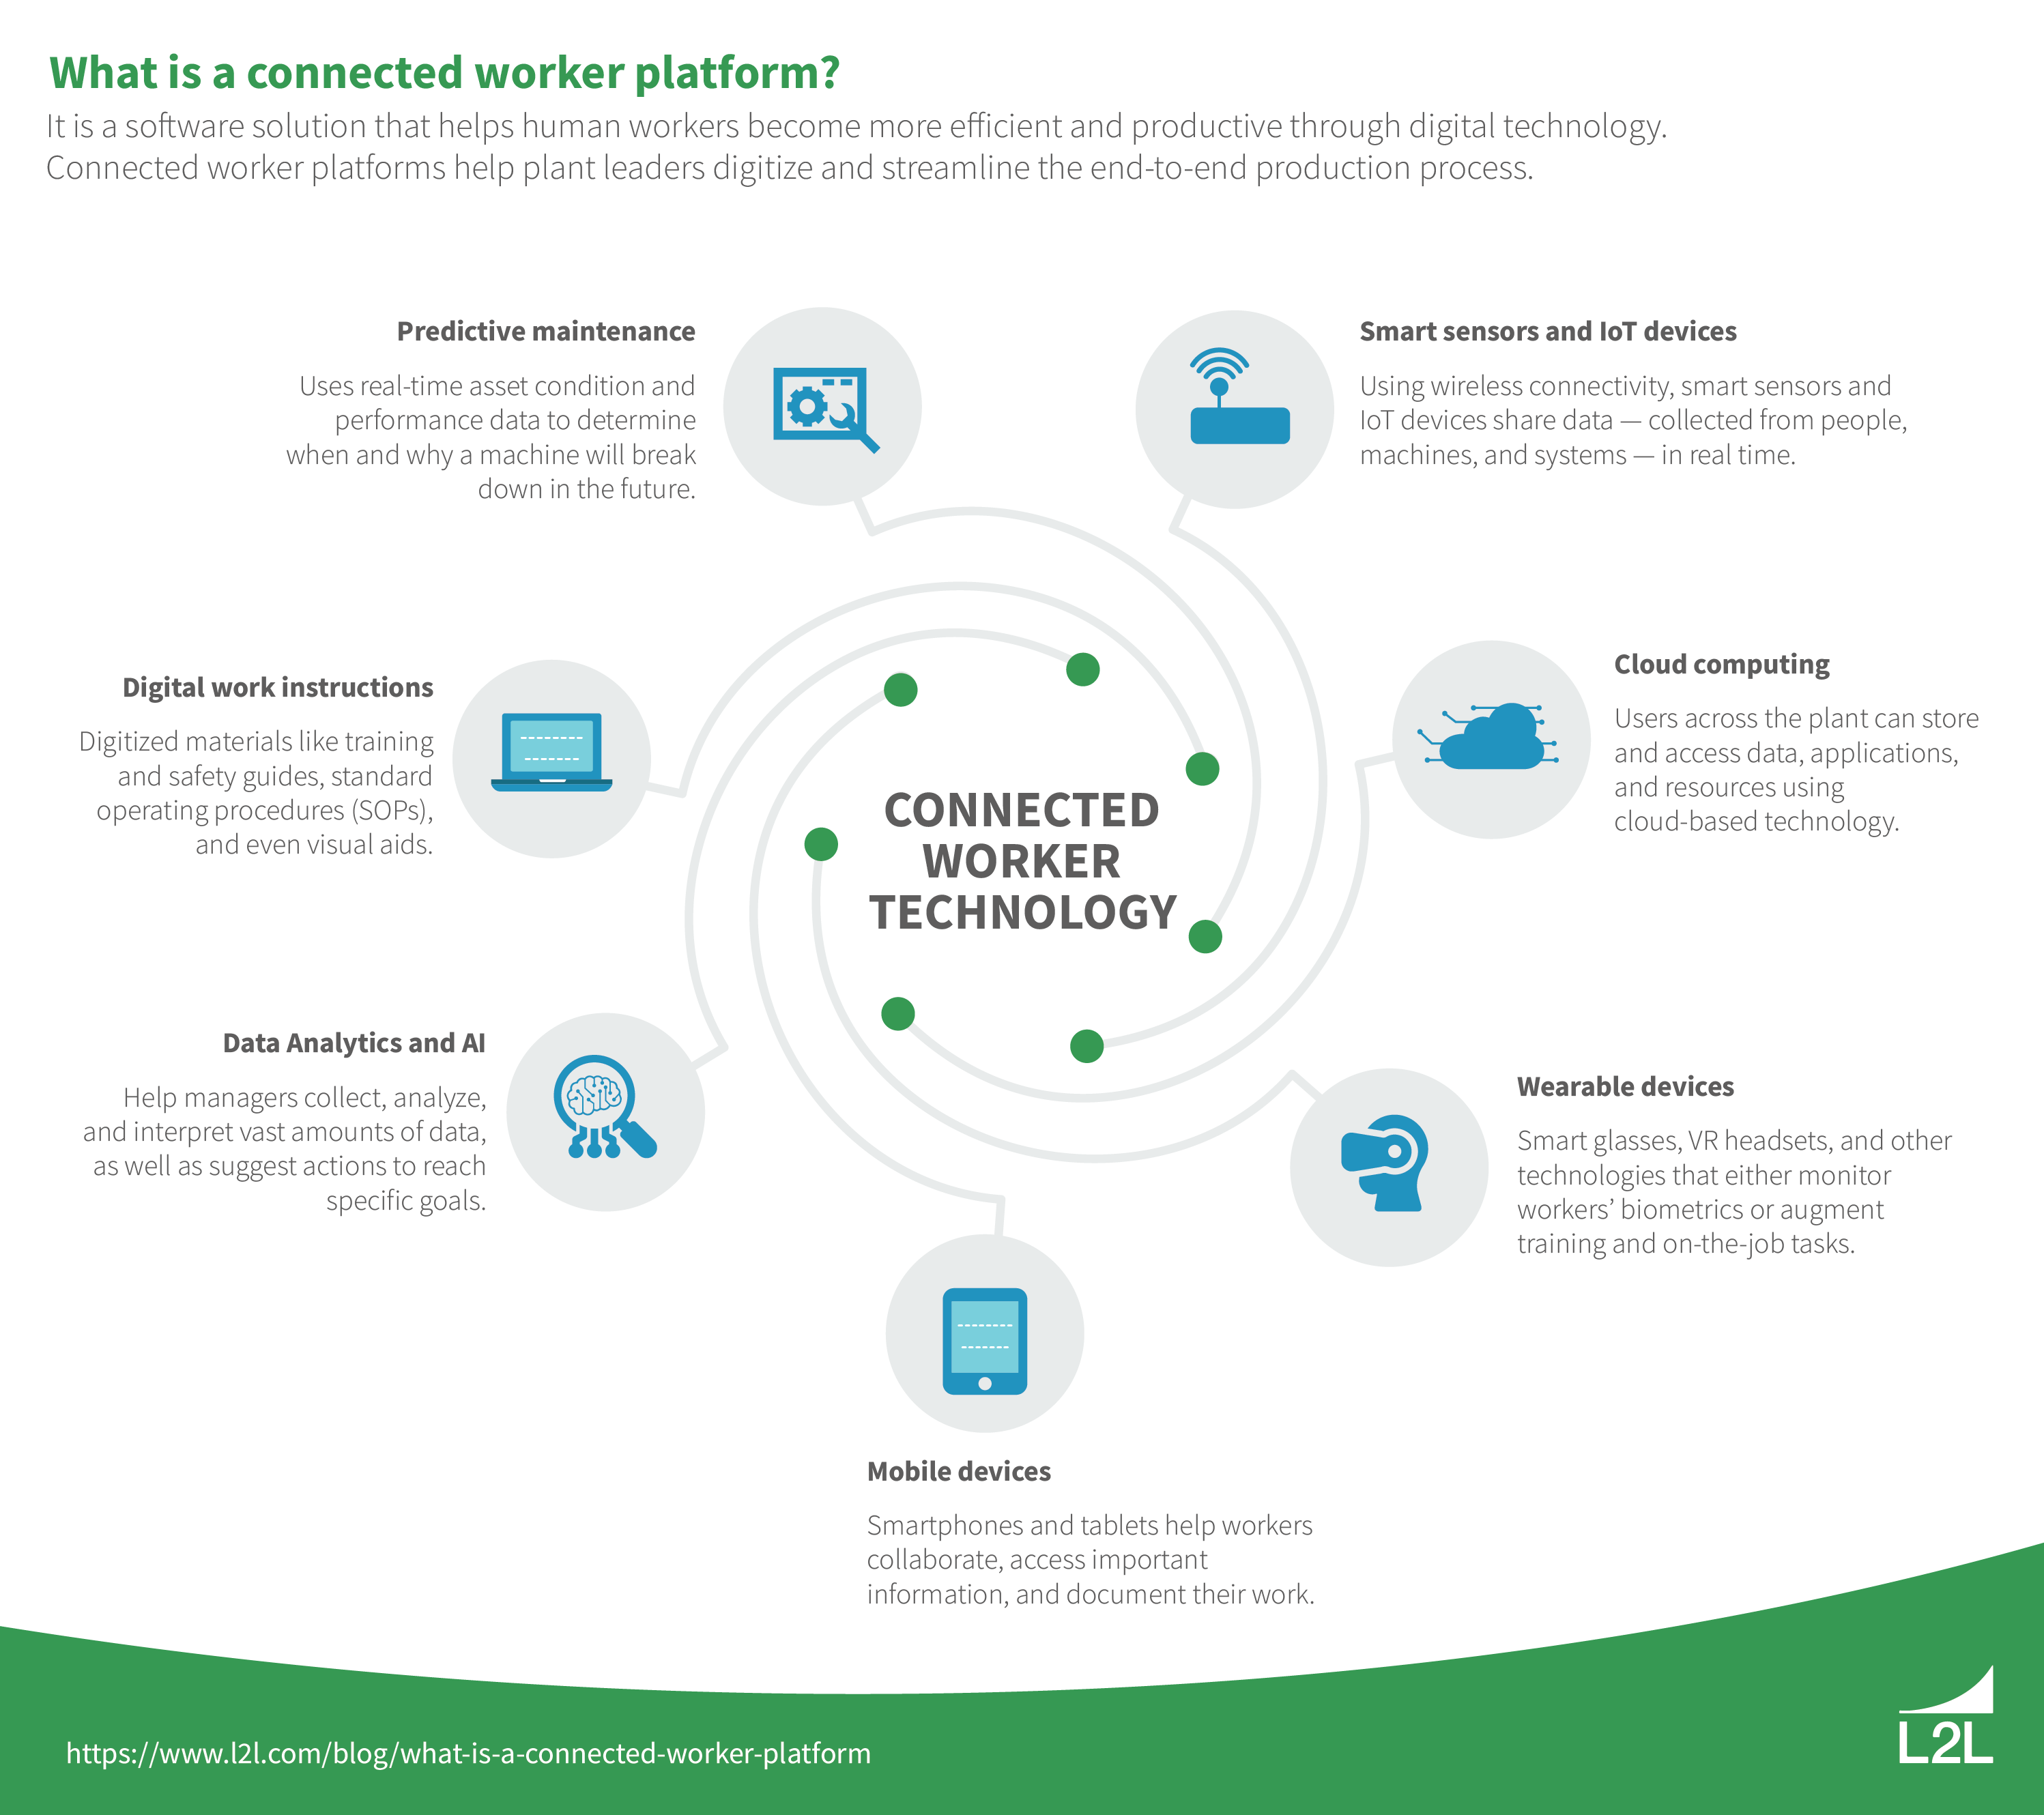 This graphic defines the connected worker platform and lists connected worker technology used in creating a connected workforce.